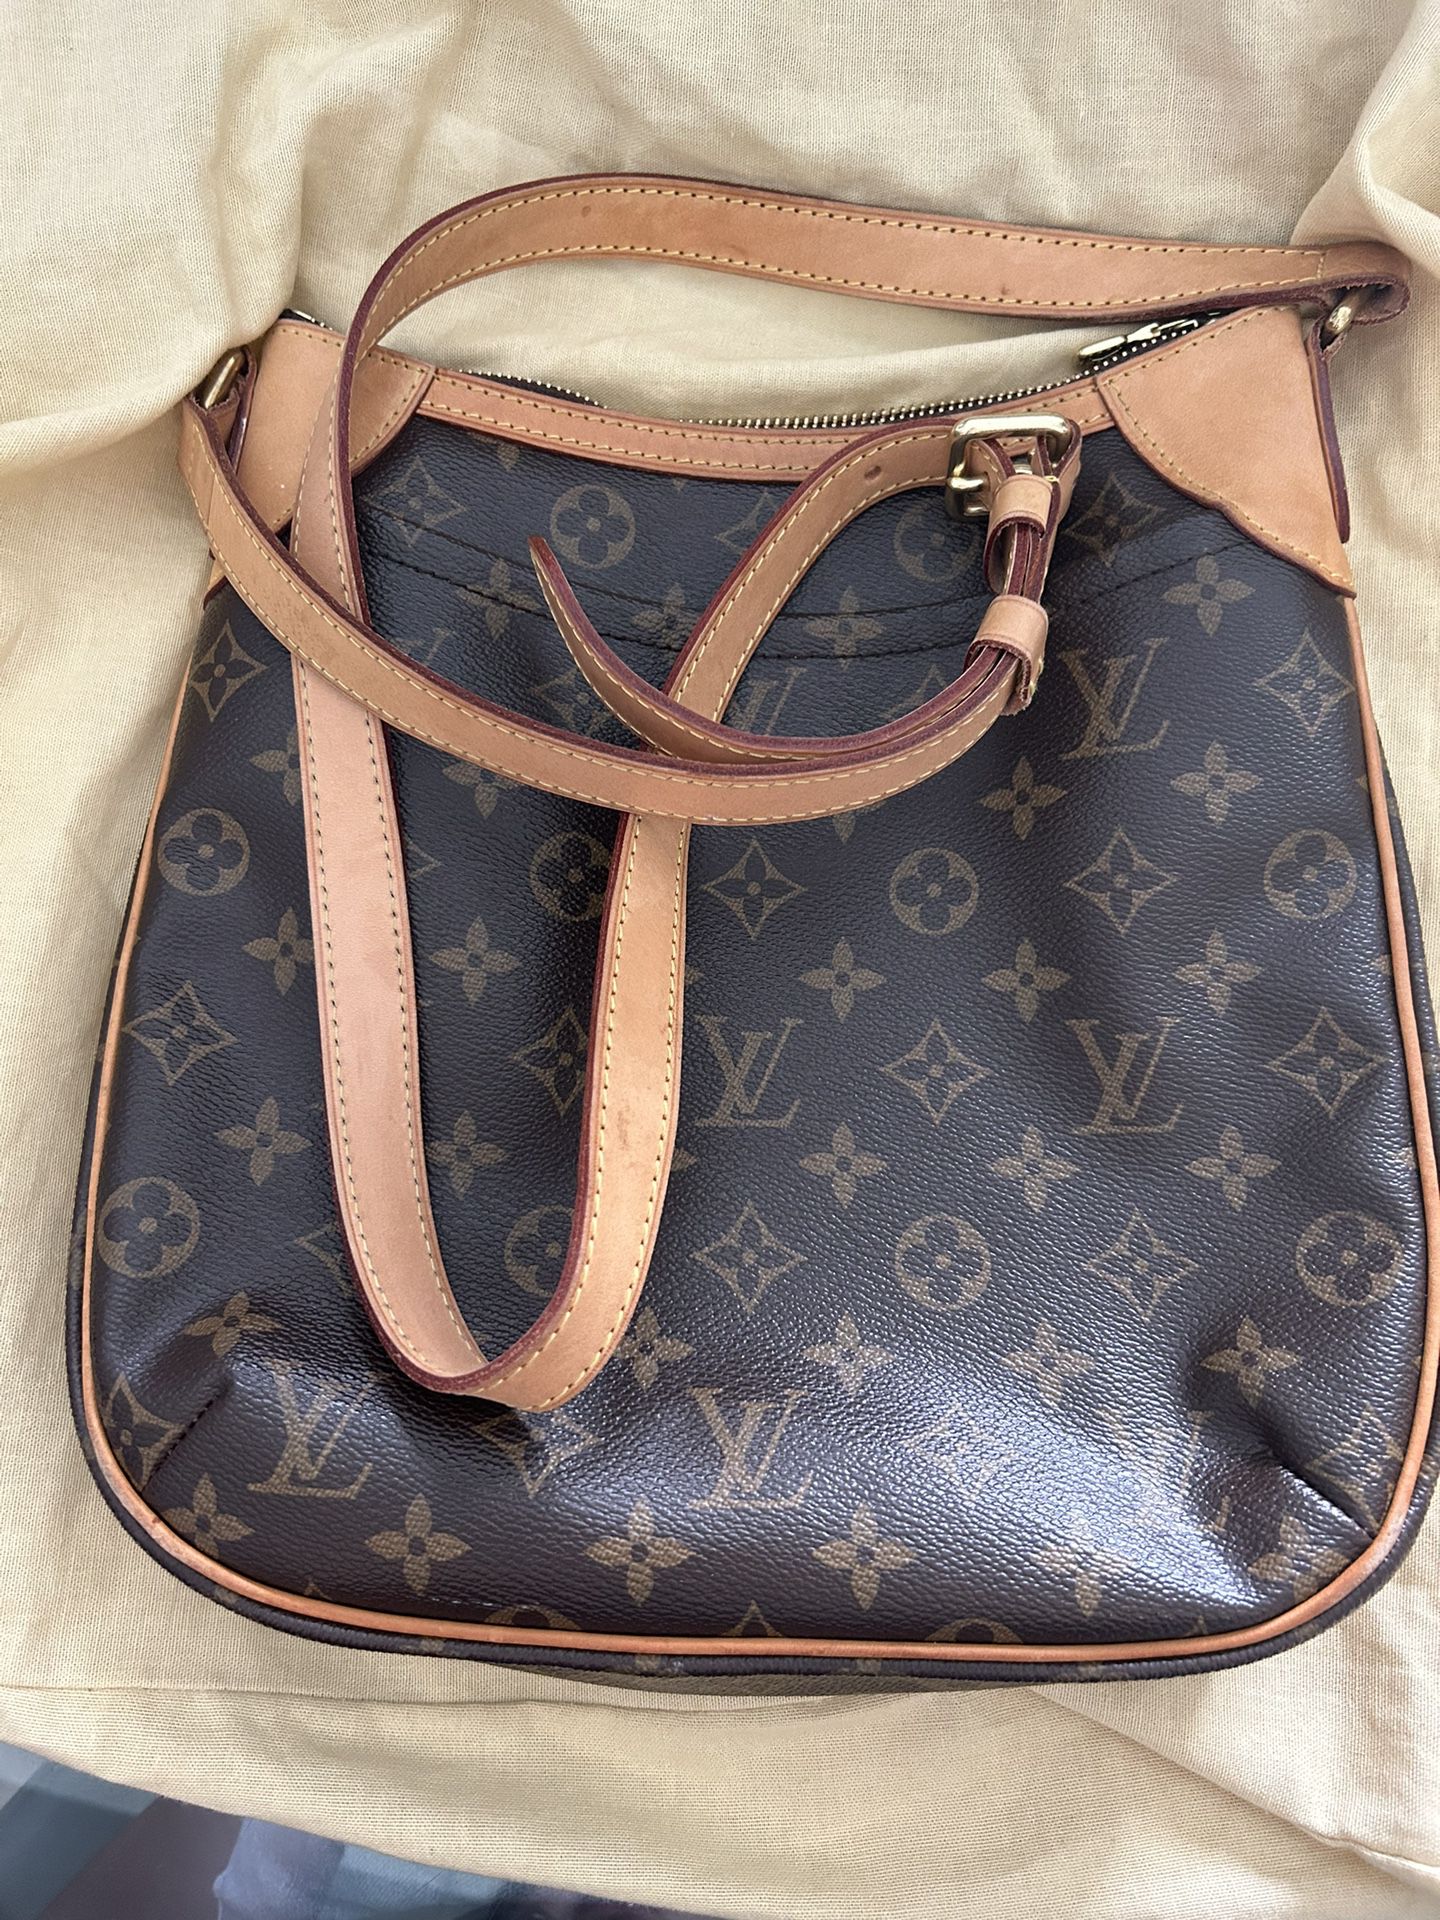 2 LOUIS VUITTON ACCESSORY GIFT BOX AND BAG for Sale in Winter Springs, FL -  OfferUp